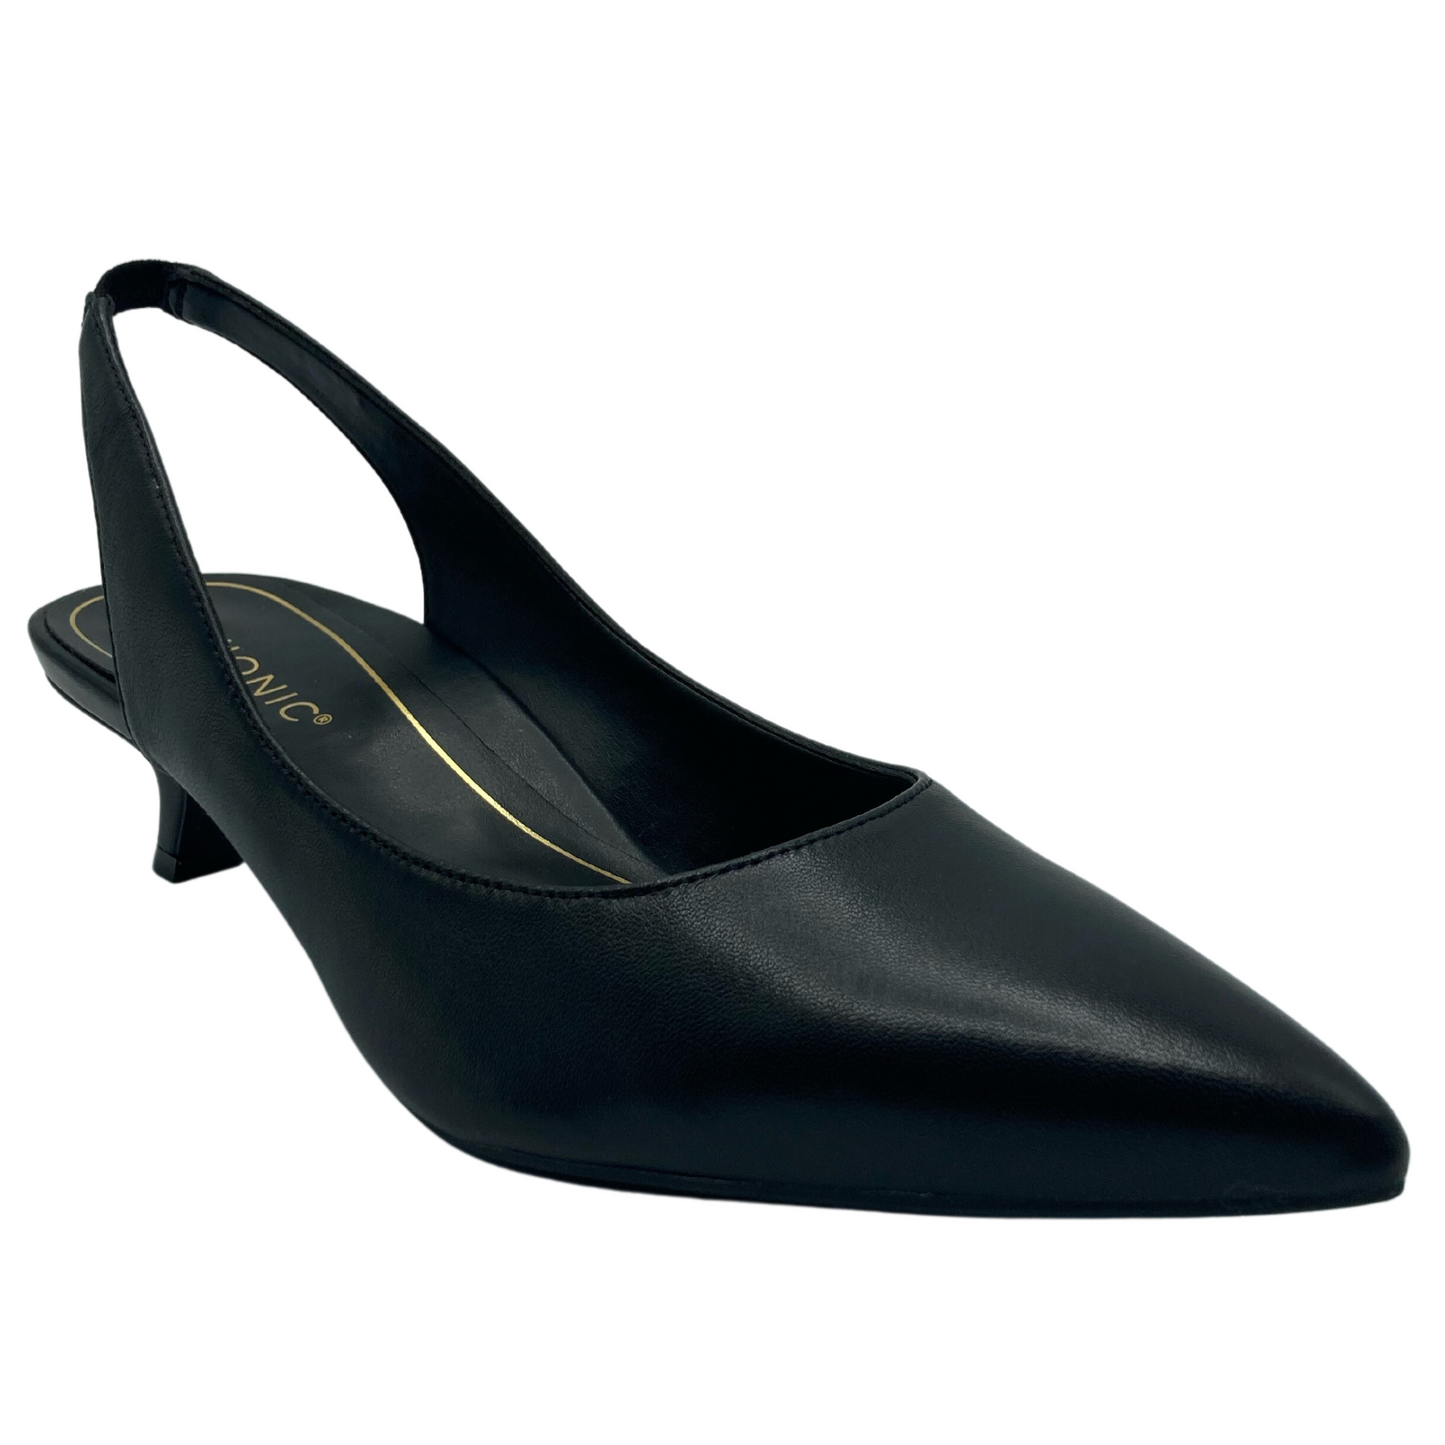 45 degree angled view of black leather, pointed toe, sling back heel with leather lining